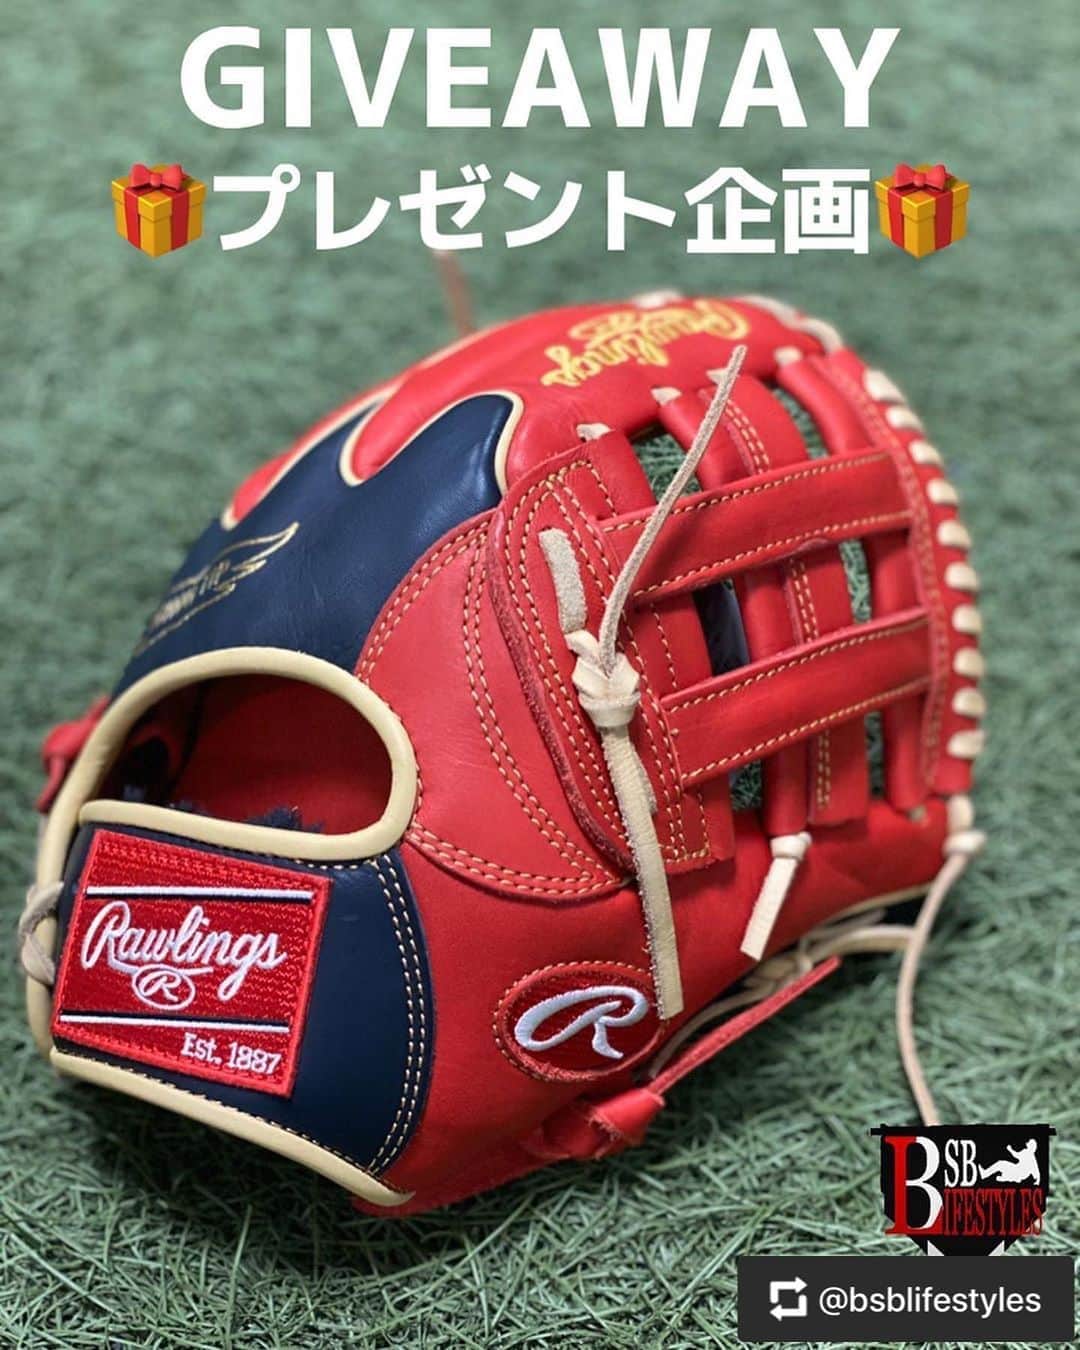 Rawlings Japanさんのインスタグラム写真 - (Rawlings JapanInstagram)「こちらはリポストになりますのでプレゼント企画詳細は下記をご覧下さい。 This is a repost.So Pls check the entry rules below account. @bsblifestyles  #Repost @bsblifestyles with @get_repost ・・・ GIVEAWAY TIME😍 We have teamed up with @act_2ndstage and @rawlings_japan_llc to giveaway a brand new Rawlings HOH Major style(infield) for free😍﻿ -﻿ Here's the entry rules:﻿応募方法👇🏻 1. Like this post﻿ @bsblifestyles ( この投稿をいいね👍🏻)﻿ ﻿ 2. Follow @bsblifestyles, @act_2ndstage ﻿ (をフォロー！)﻿ ﻿ 3. Tag a friend who needs this👀 The more you comment, more chance you might win! ﻿ (コメント欄に友達をタグ付け！一人でも多くタグ付け/コメントで当選確率up!)﻿ ﻿ →Winner will be announced on ﻿ next Sunday (3/31) 8am EST﻿ (当選者は来週の火曜日3/31の21時に発表します！)﻿ ﻿ #giveaway #bsblifestyles #baseball #mlb #beisbol #rawlings #l4l #likeforlikes #f4f #followforfollowback #ローリングス #グローブ #野球 #野球部 #甲子園 #高校野球 #プロ野球スカウト @rawlings_japan_llc」3月25日 10時17分 - rawlings_japan_llc